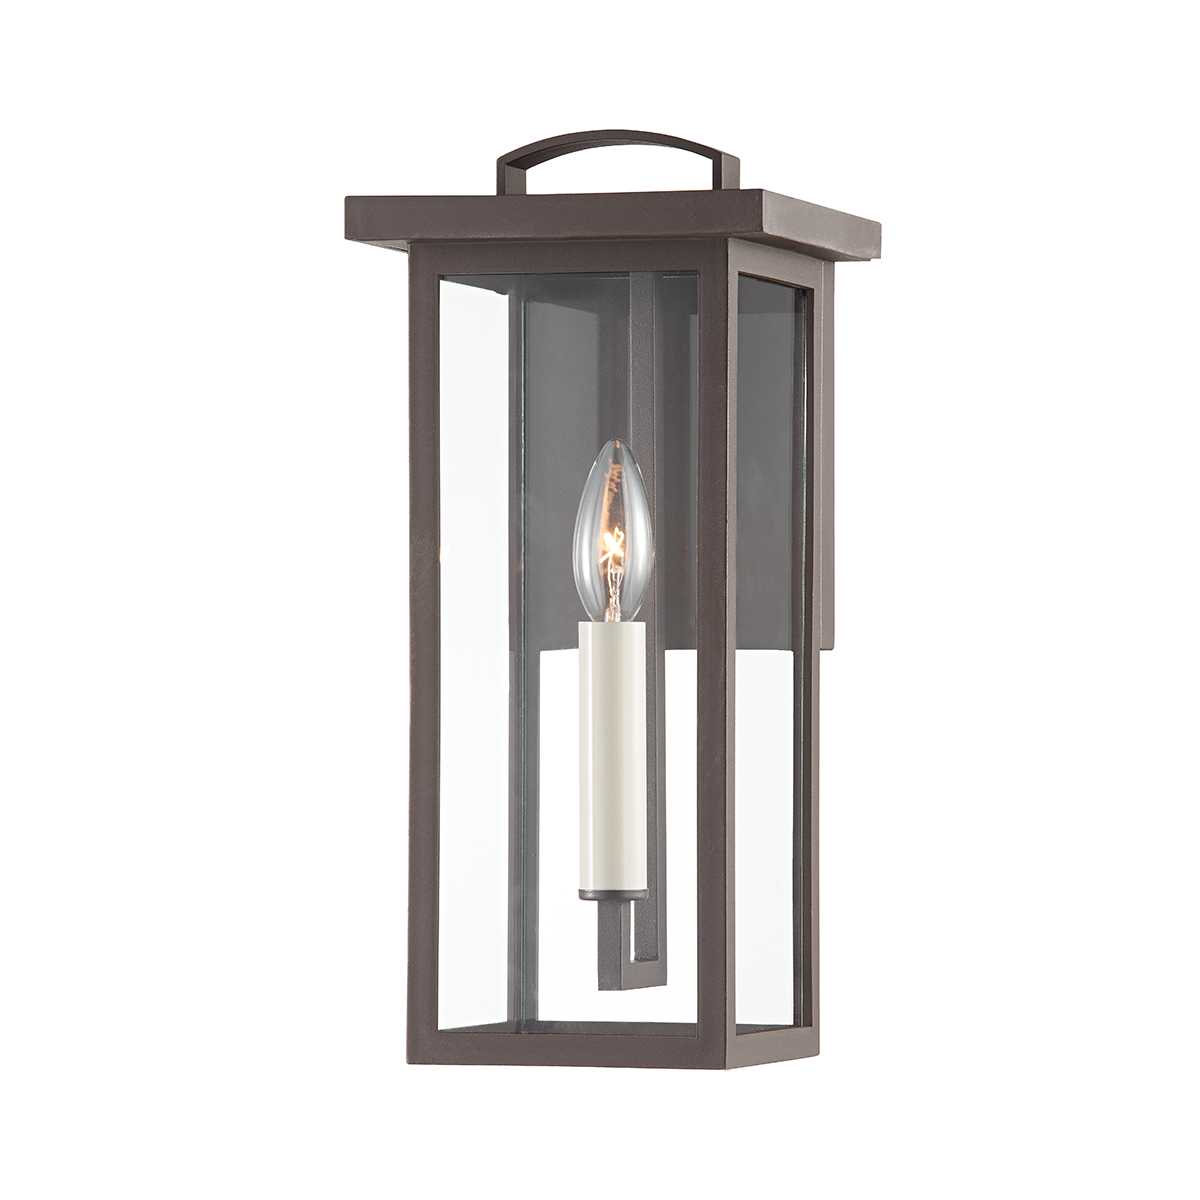 Troy EDEN 1 LIGHT SMALL EXTERIOR WALL SCONCE B7521 Outdoor l Wall Troy Lighting TEXTURED BRONZE  